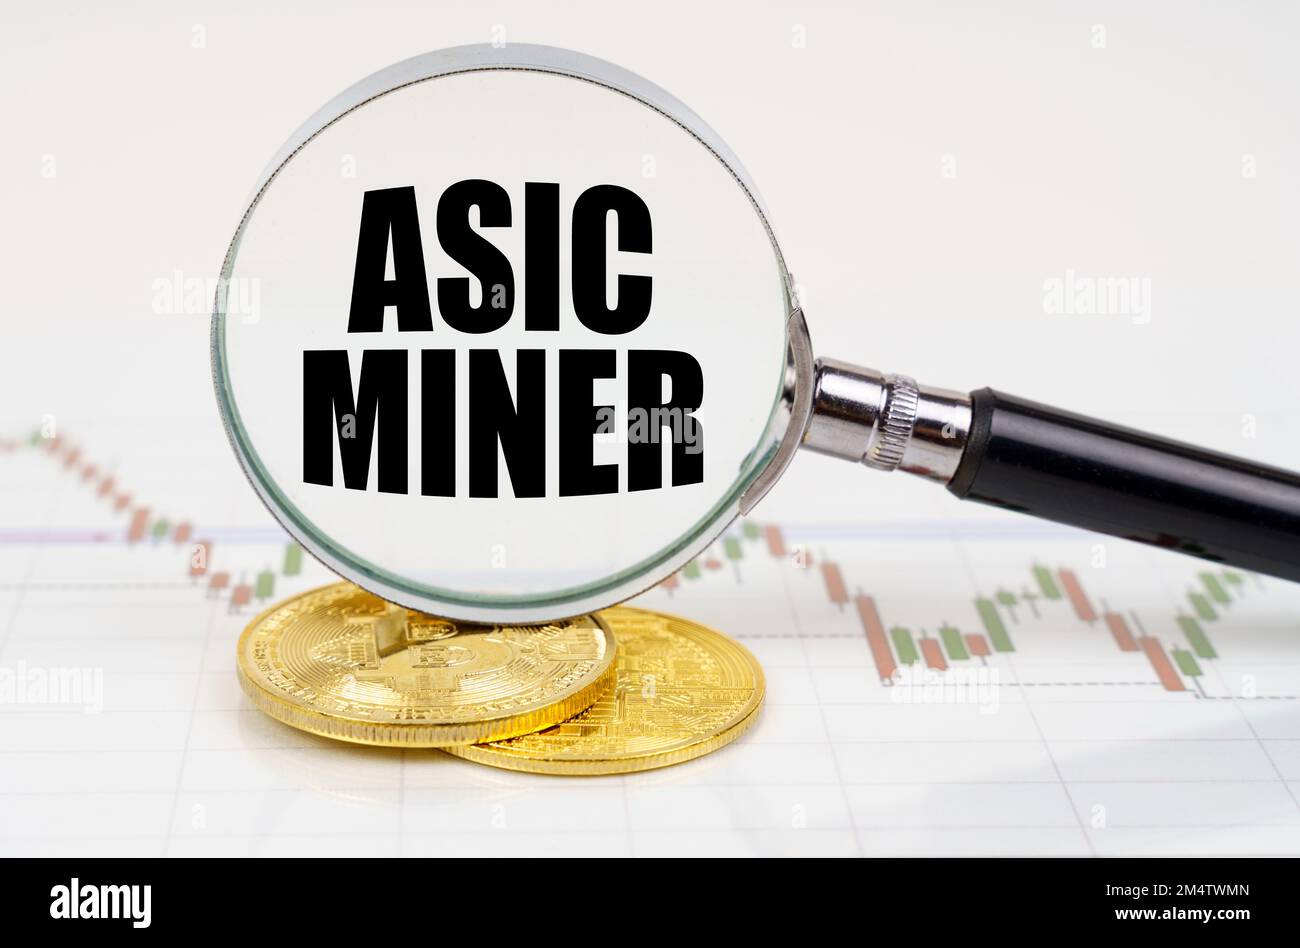 Business and technology concept. On the chart with quotes are bitcoins and there is a magnifying glass with the inscription - Asic miner Stock Photo